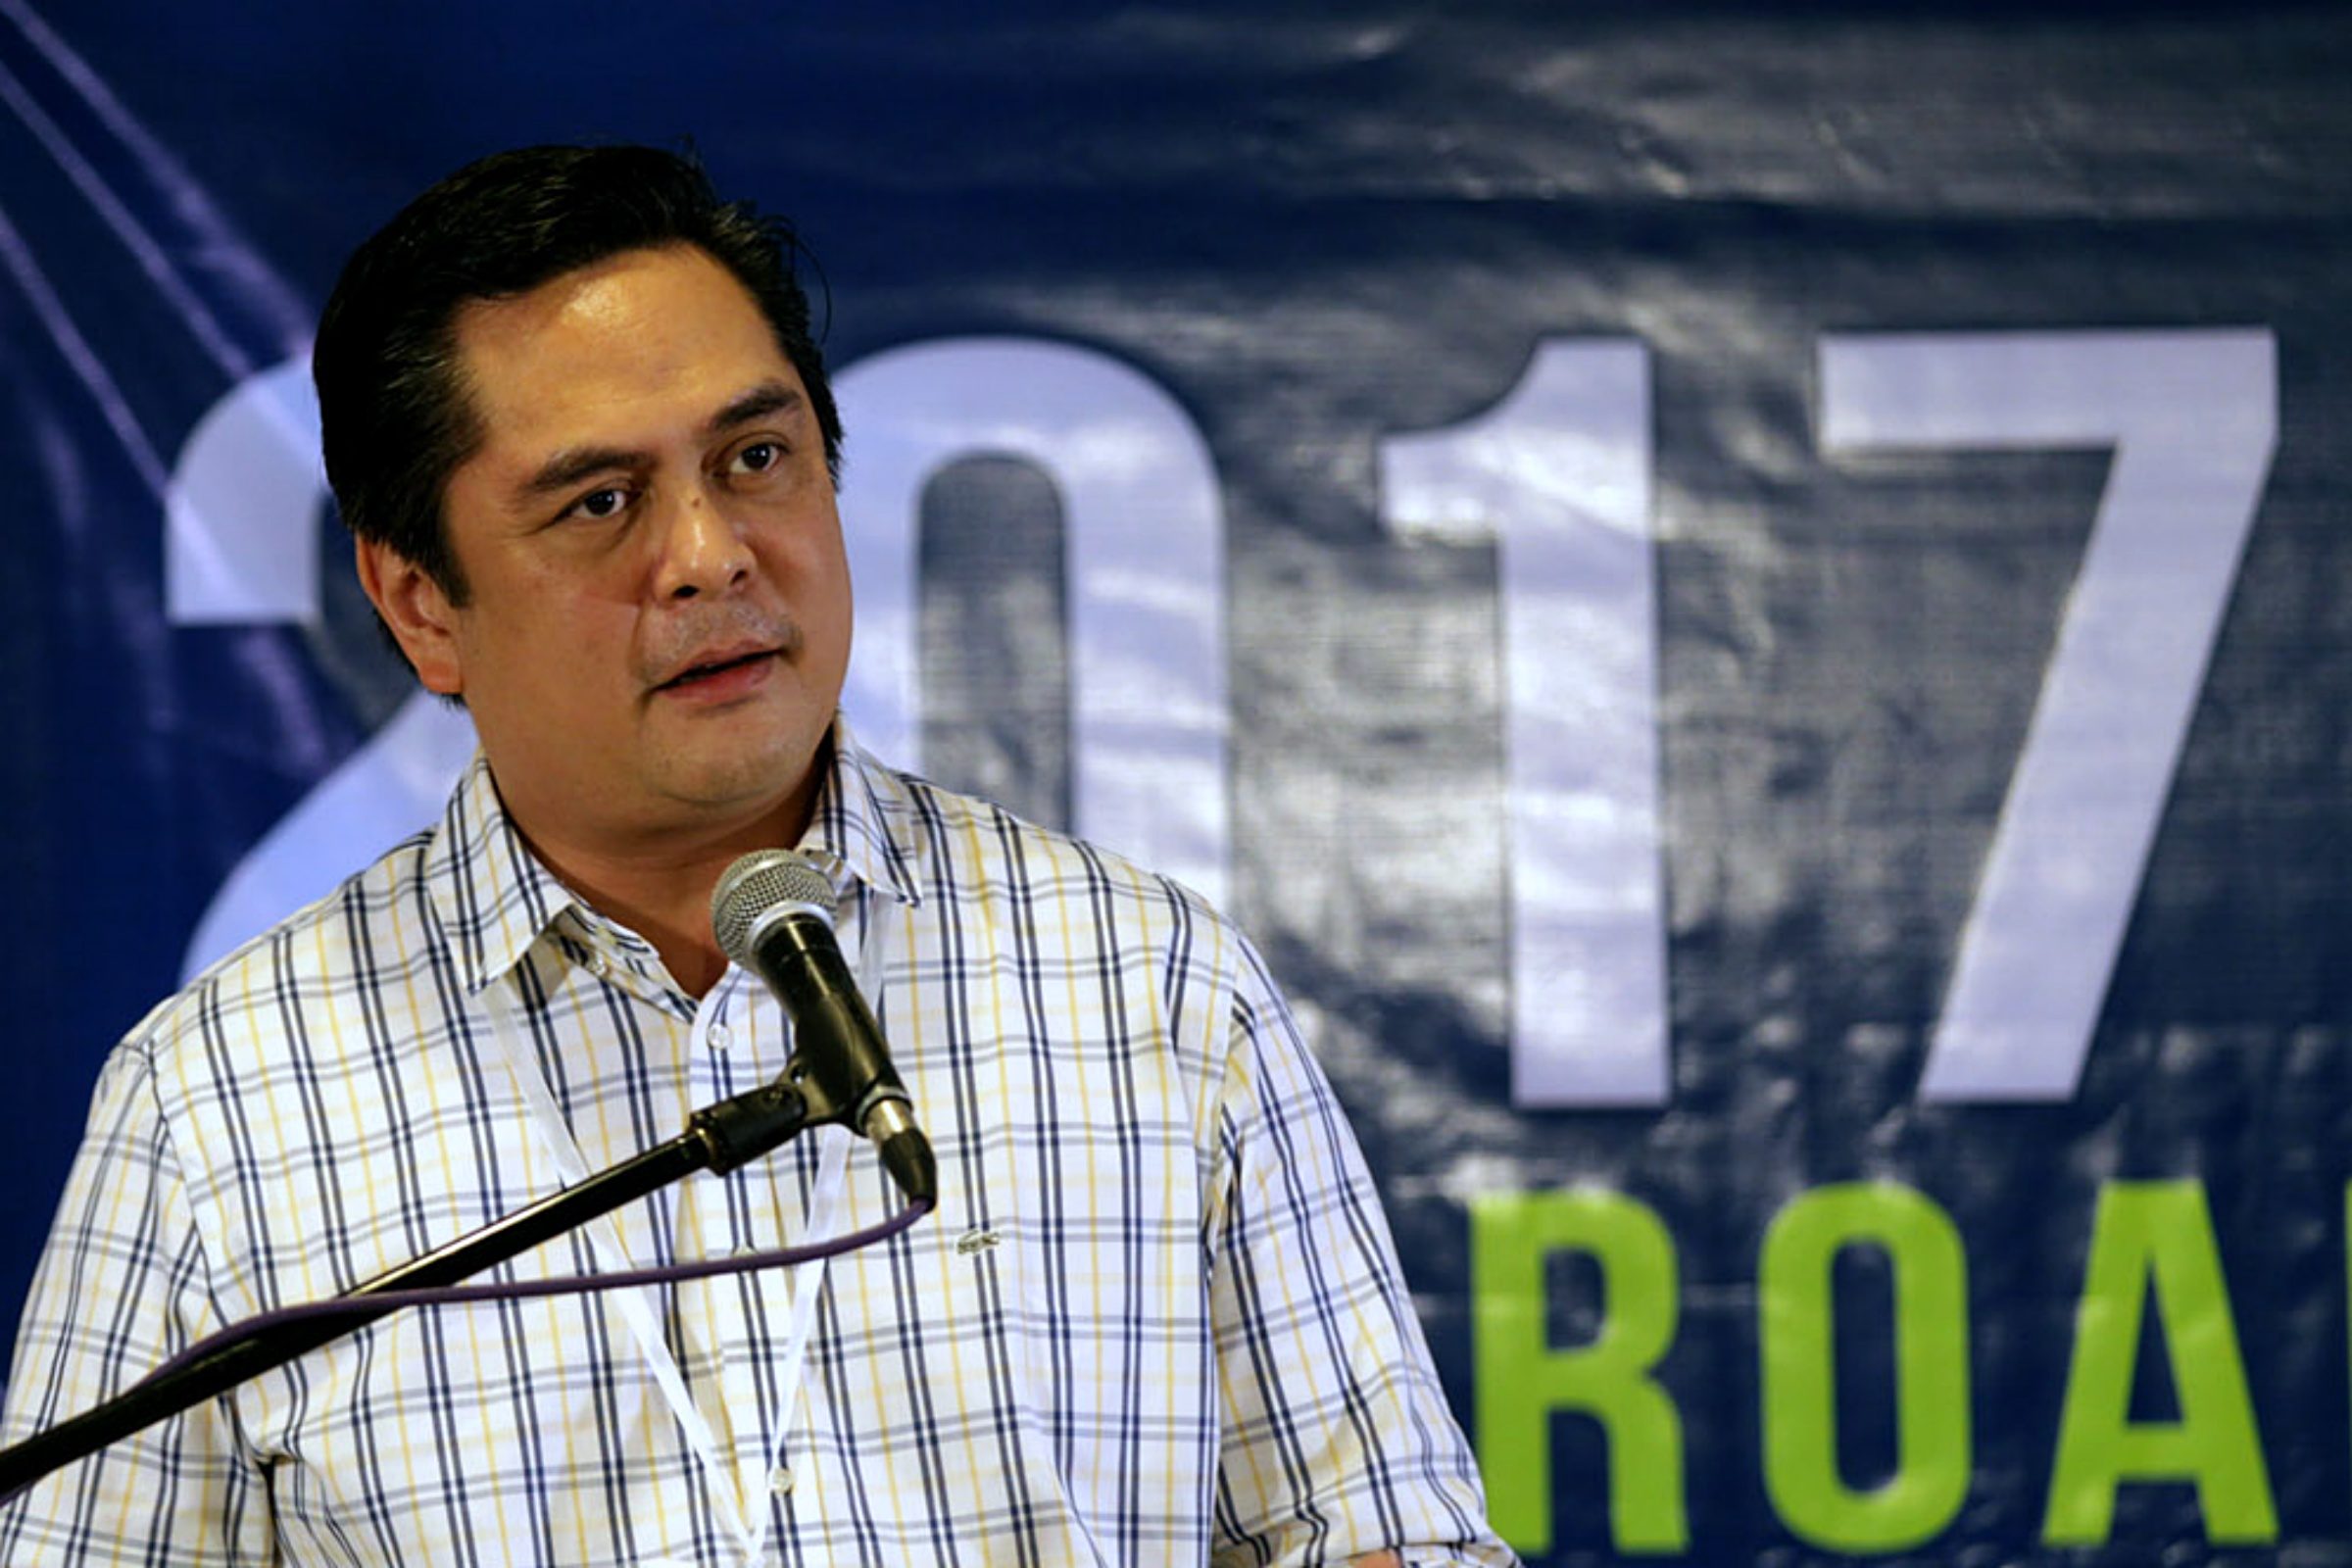 PNA hit by cyber attack on day of viral blunders – Andanar